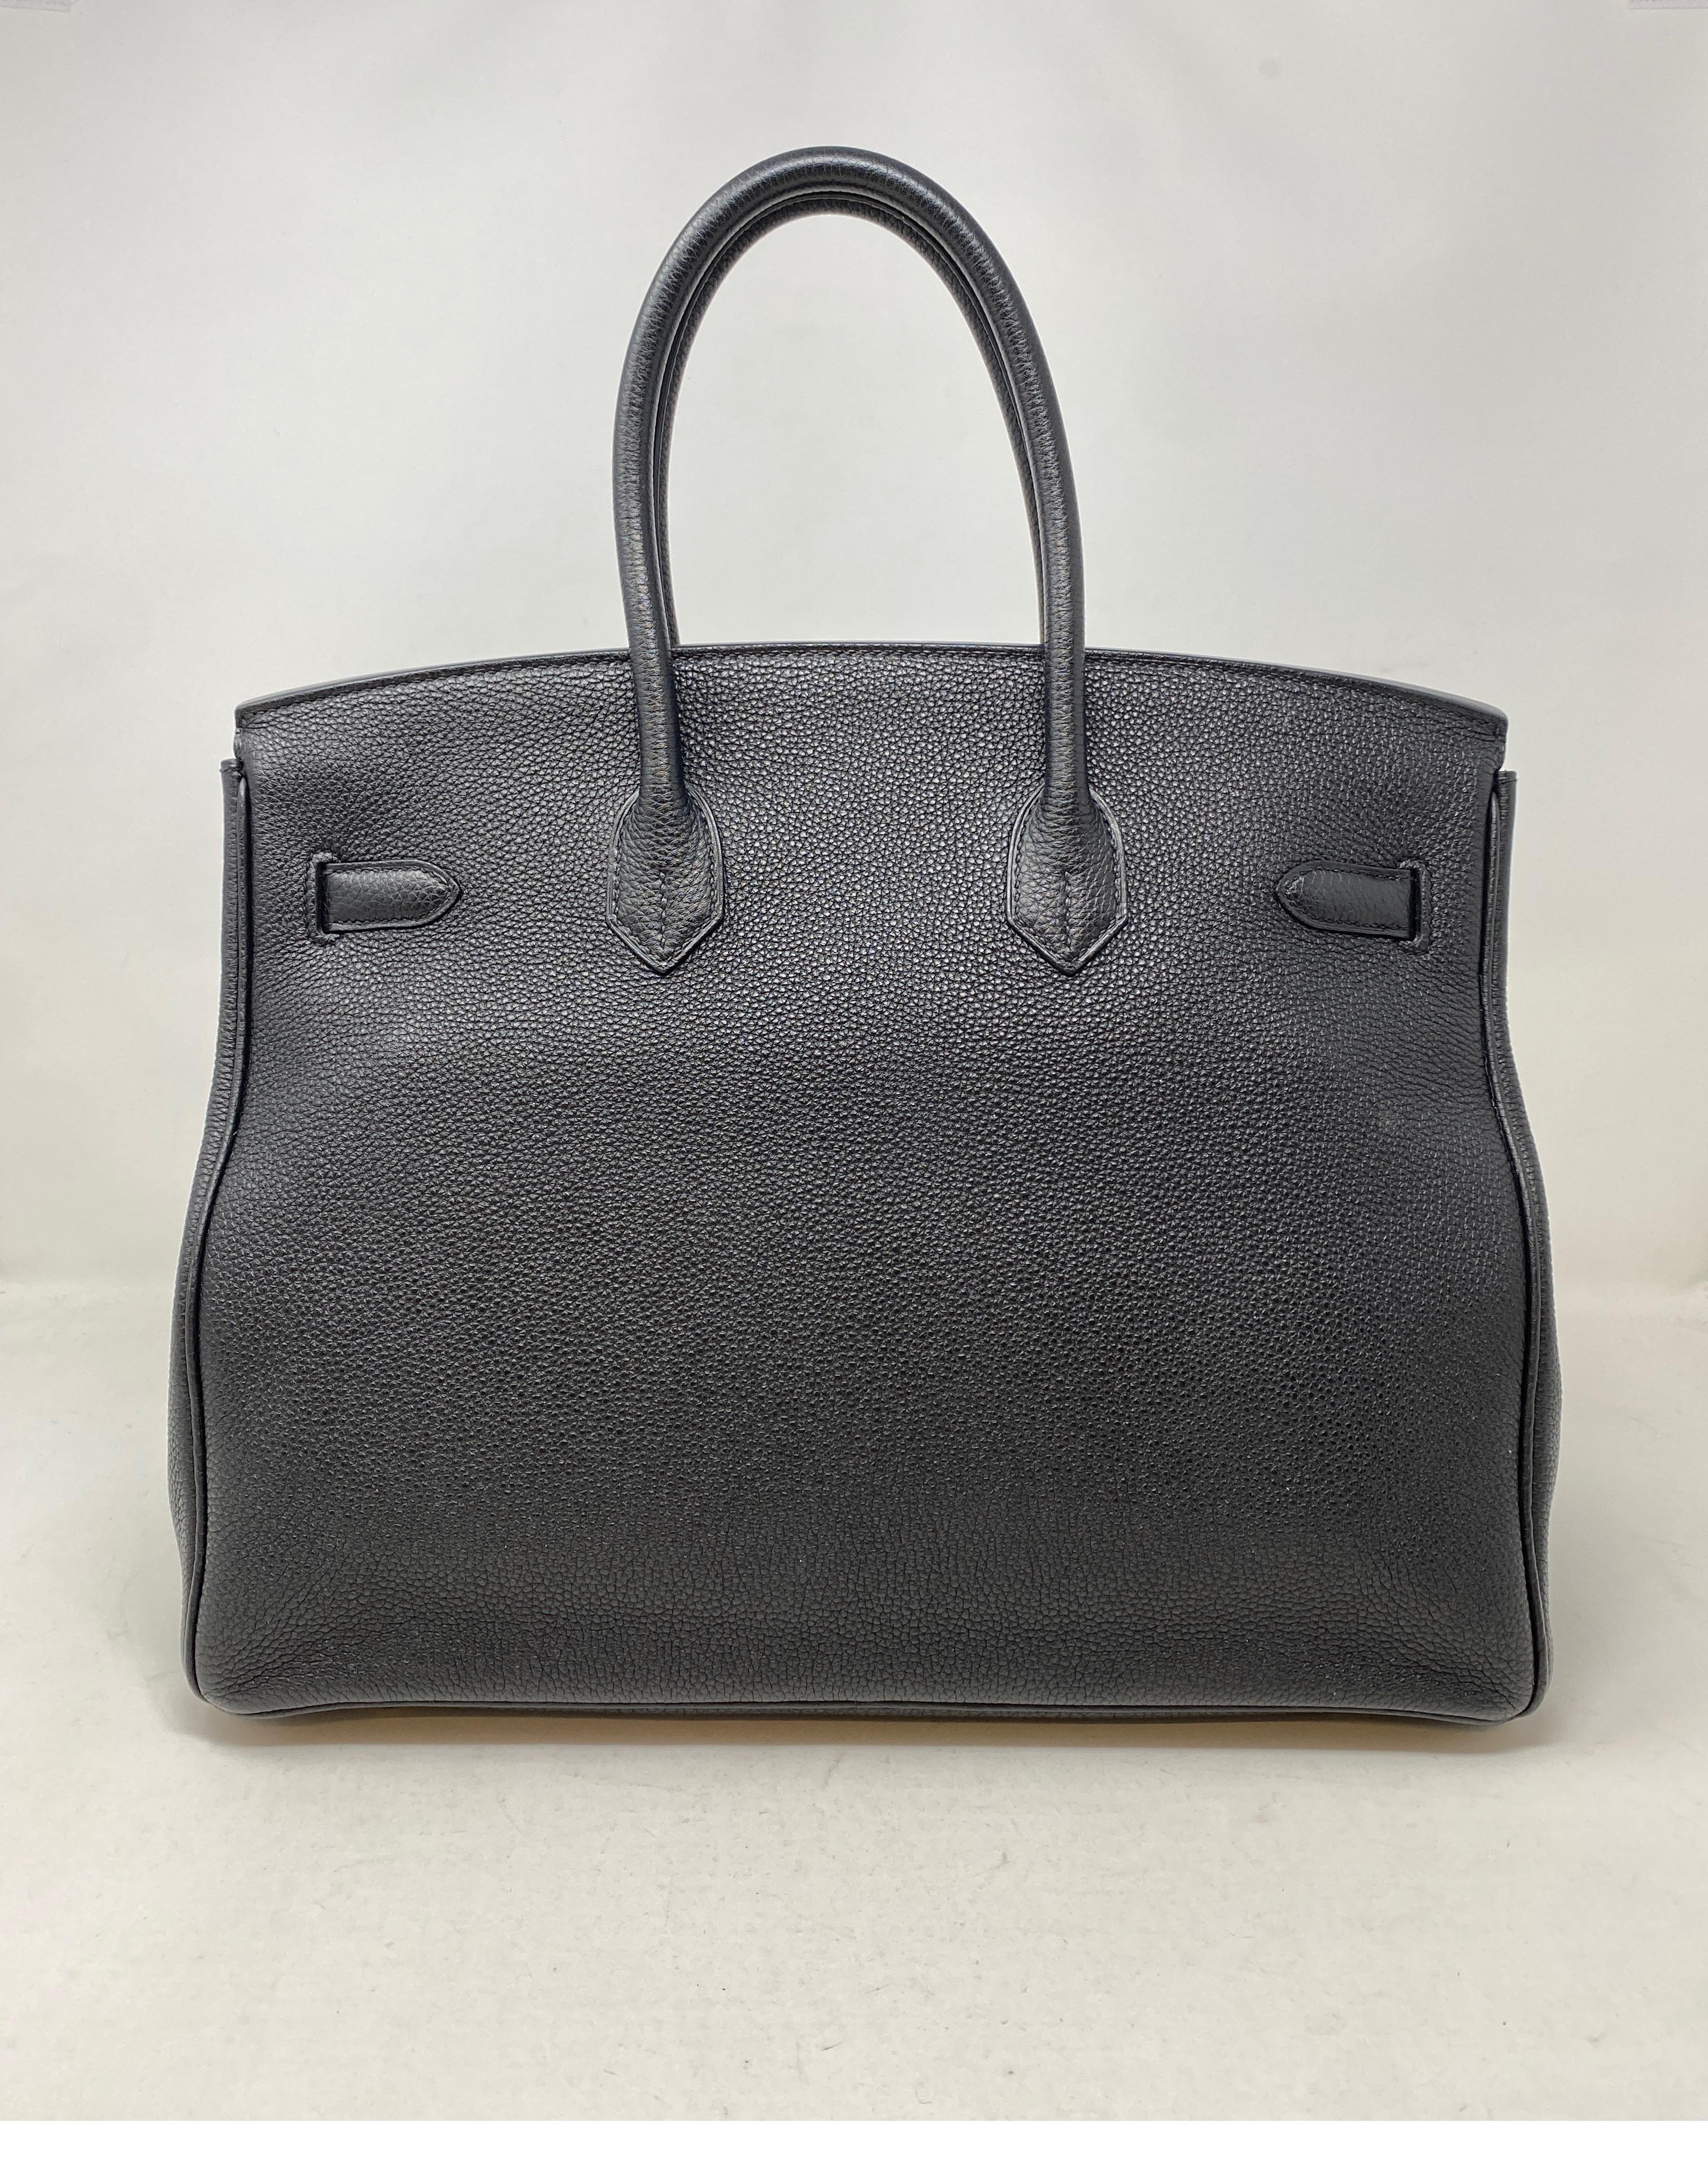 Hermes Black Birkin 35 Bag. Gold hardware. Excellent condition. Togo leather. Most wanted black with gold hardware. Classic at best. Great investment bag. Includes clochette, lock, keys, and dust cover. Guaranteed authentic. 